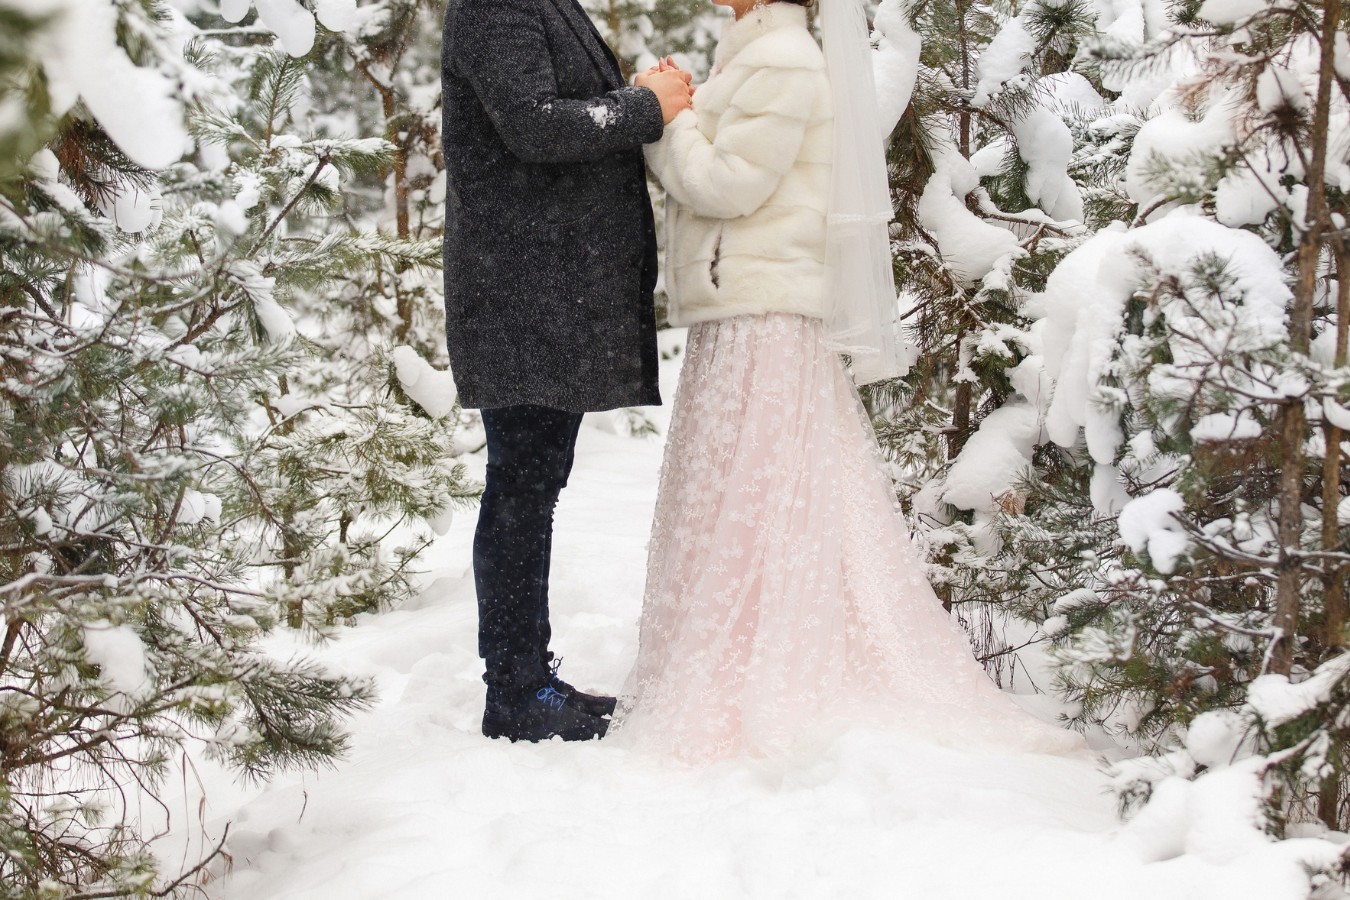 A Winter Wedding That Won’t Spoil The Holidays: The Do’s & Don’ts of a Winter Wedding